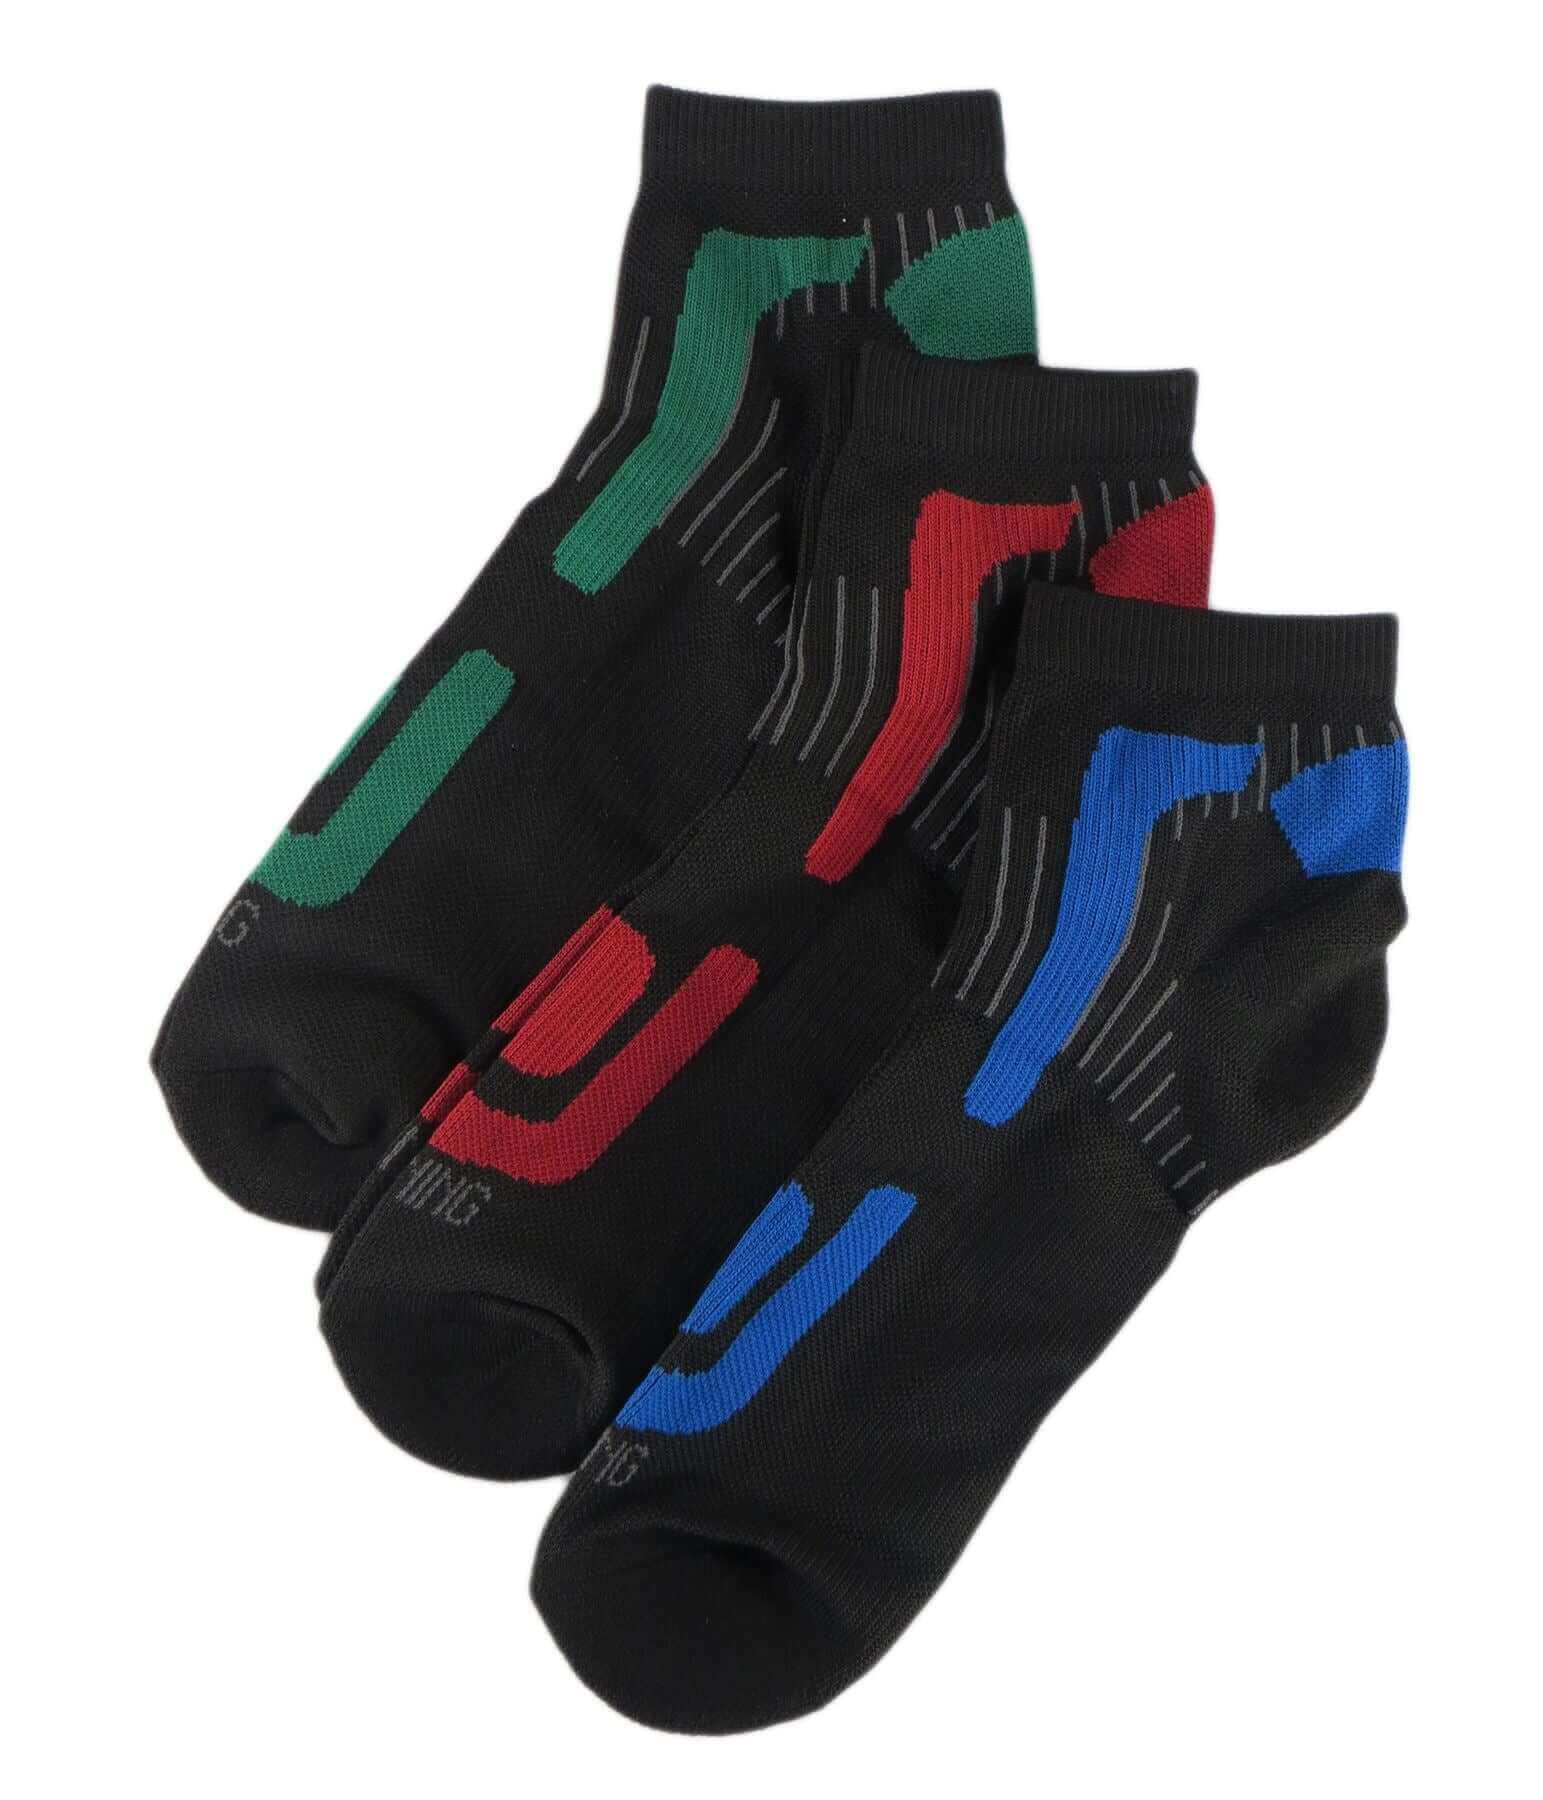 6 Pairs Of Men's Sport Socks, Active Trainer Socks For Cycling Gym Sports. Buy now for £5.00. A Socks by Sock Stack. 6-11, acrylic, assorted, athletics, black, blue, boot, boys socks, comfortable, cycling, elastane, green, grey, gym, low cut, mens, multi